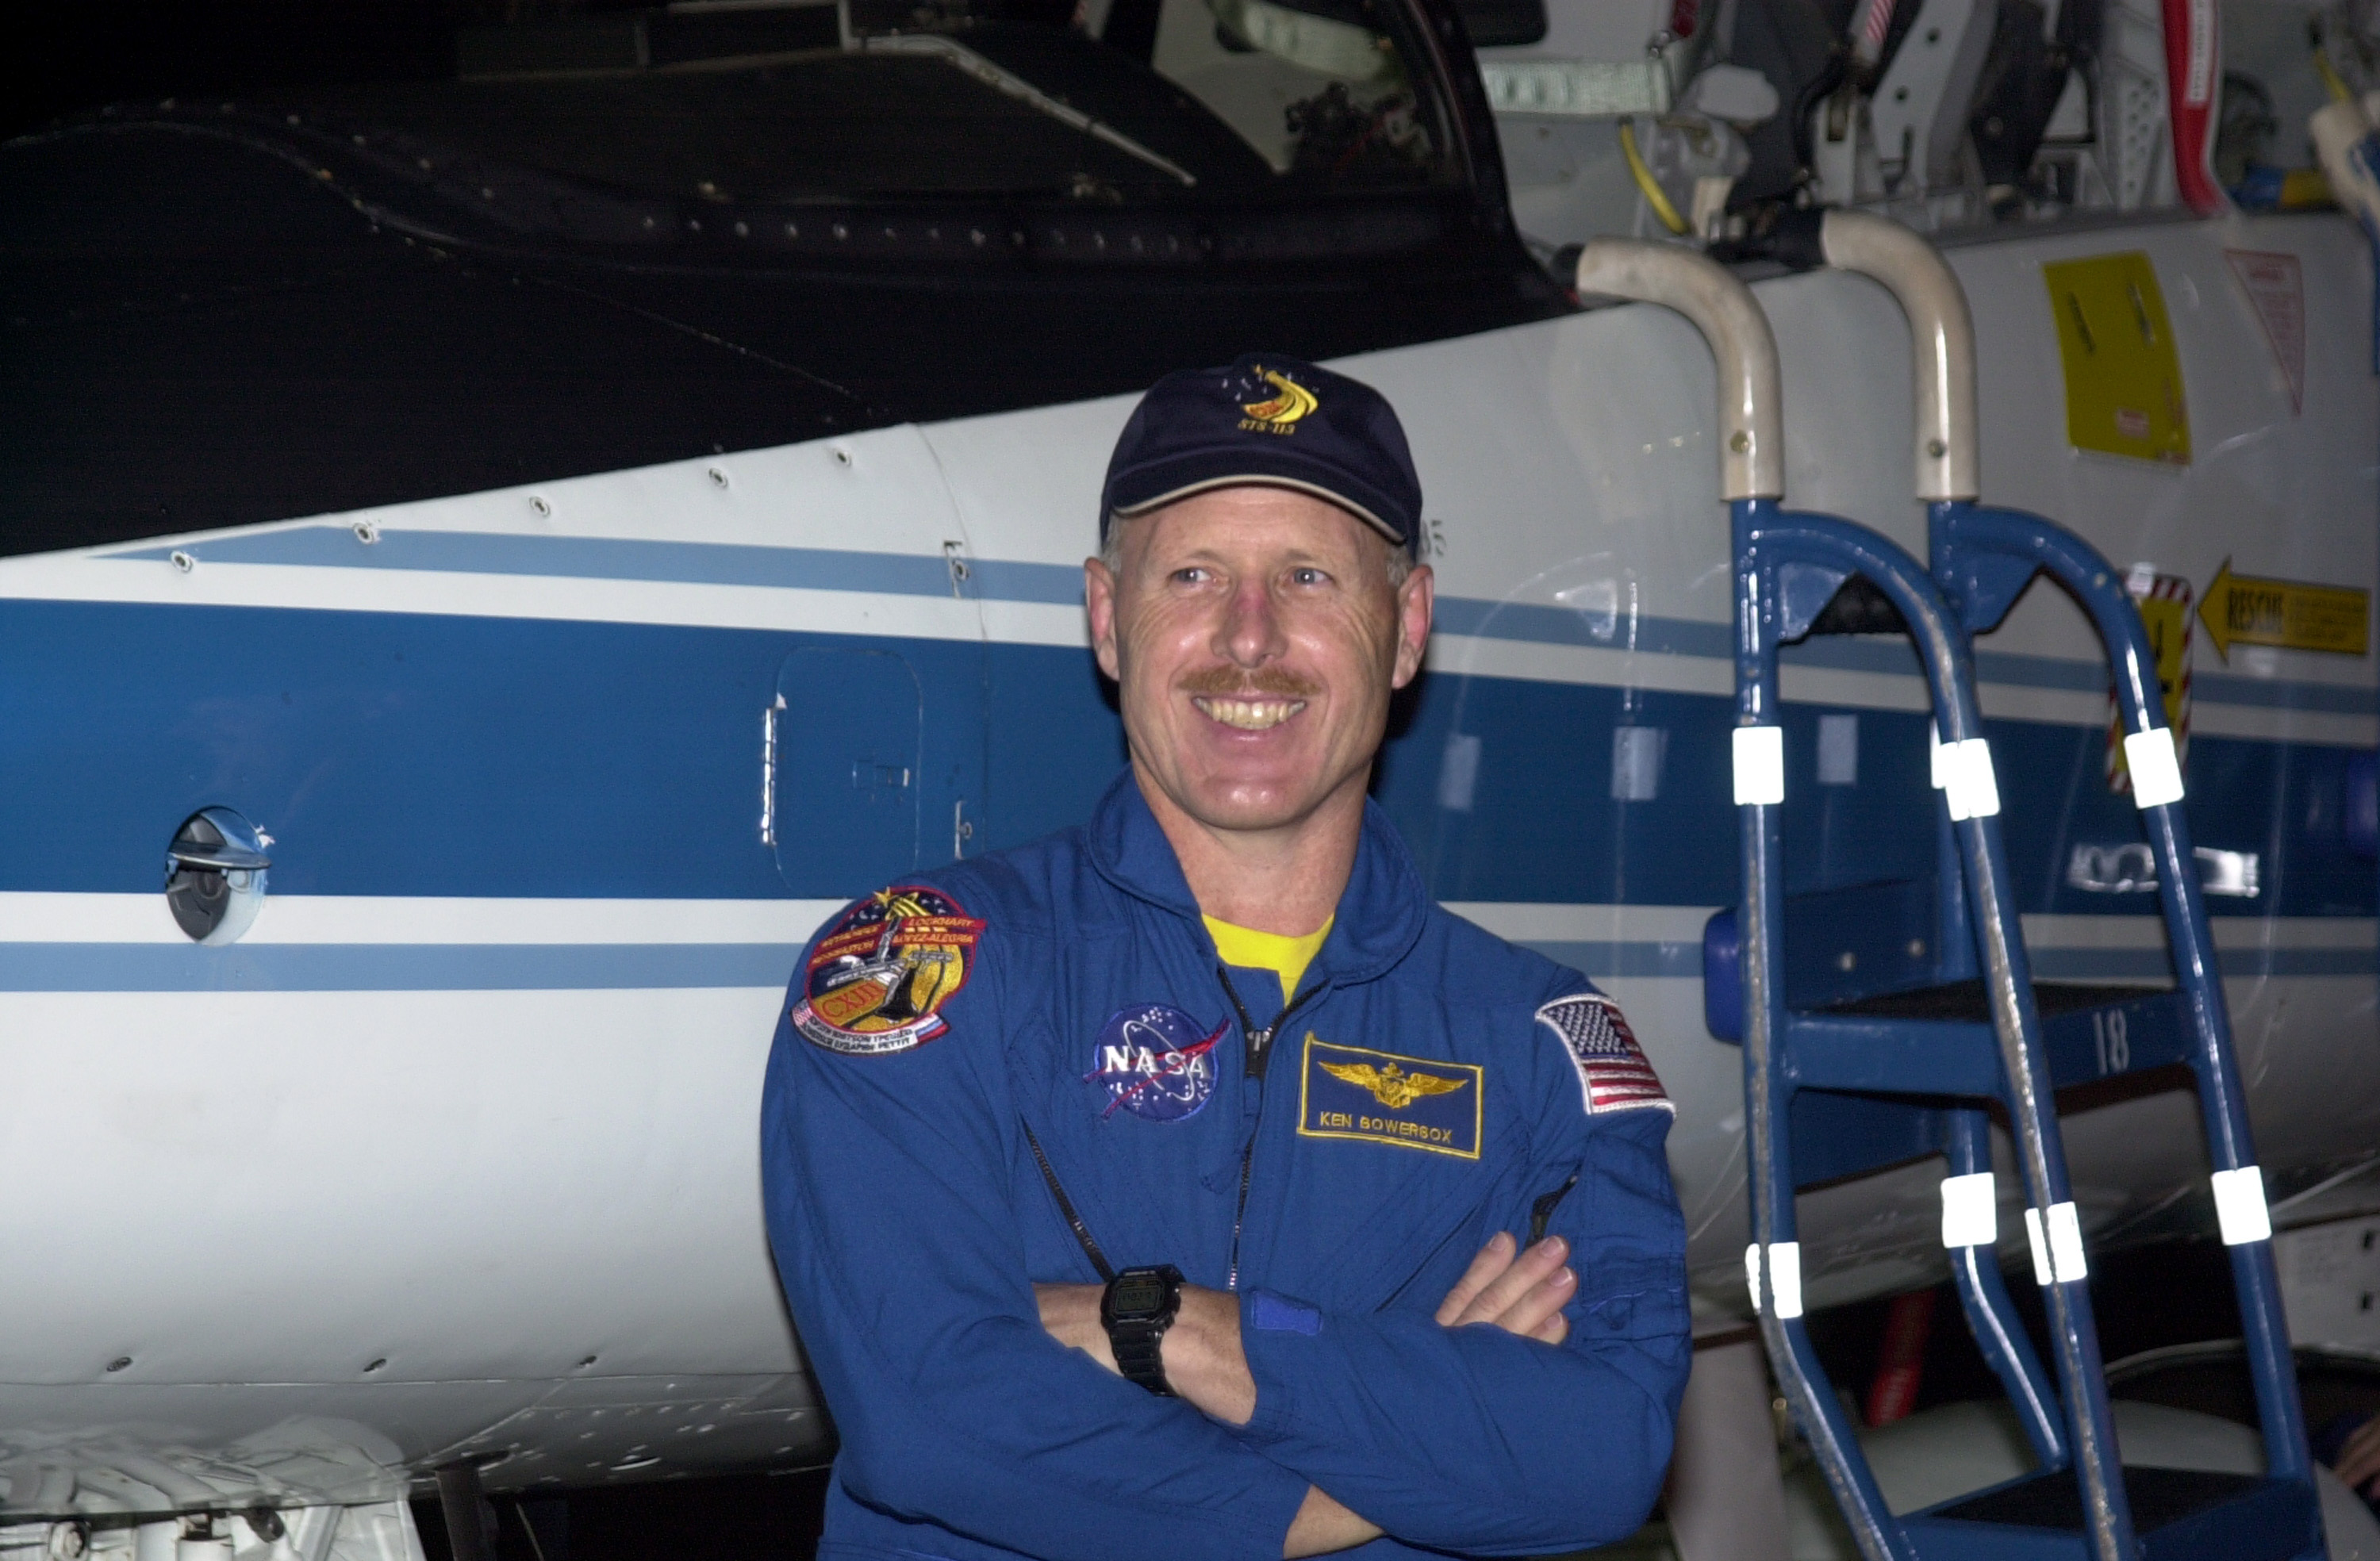 Ken Bowersox preparing for the launch of Expedition 6 on Space Shuttle Endeavour in 2003.